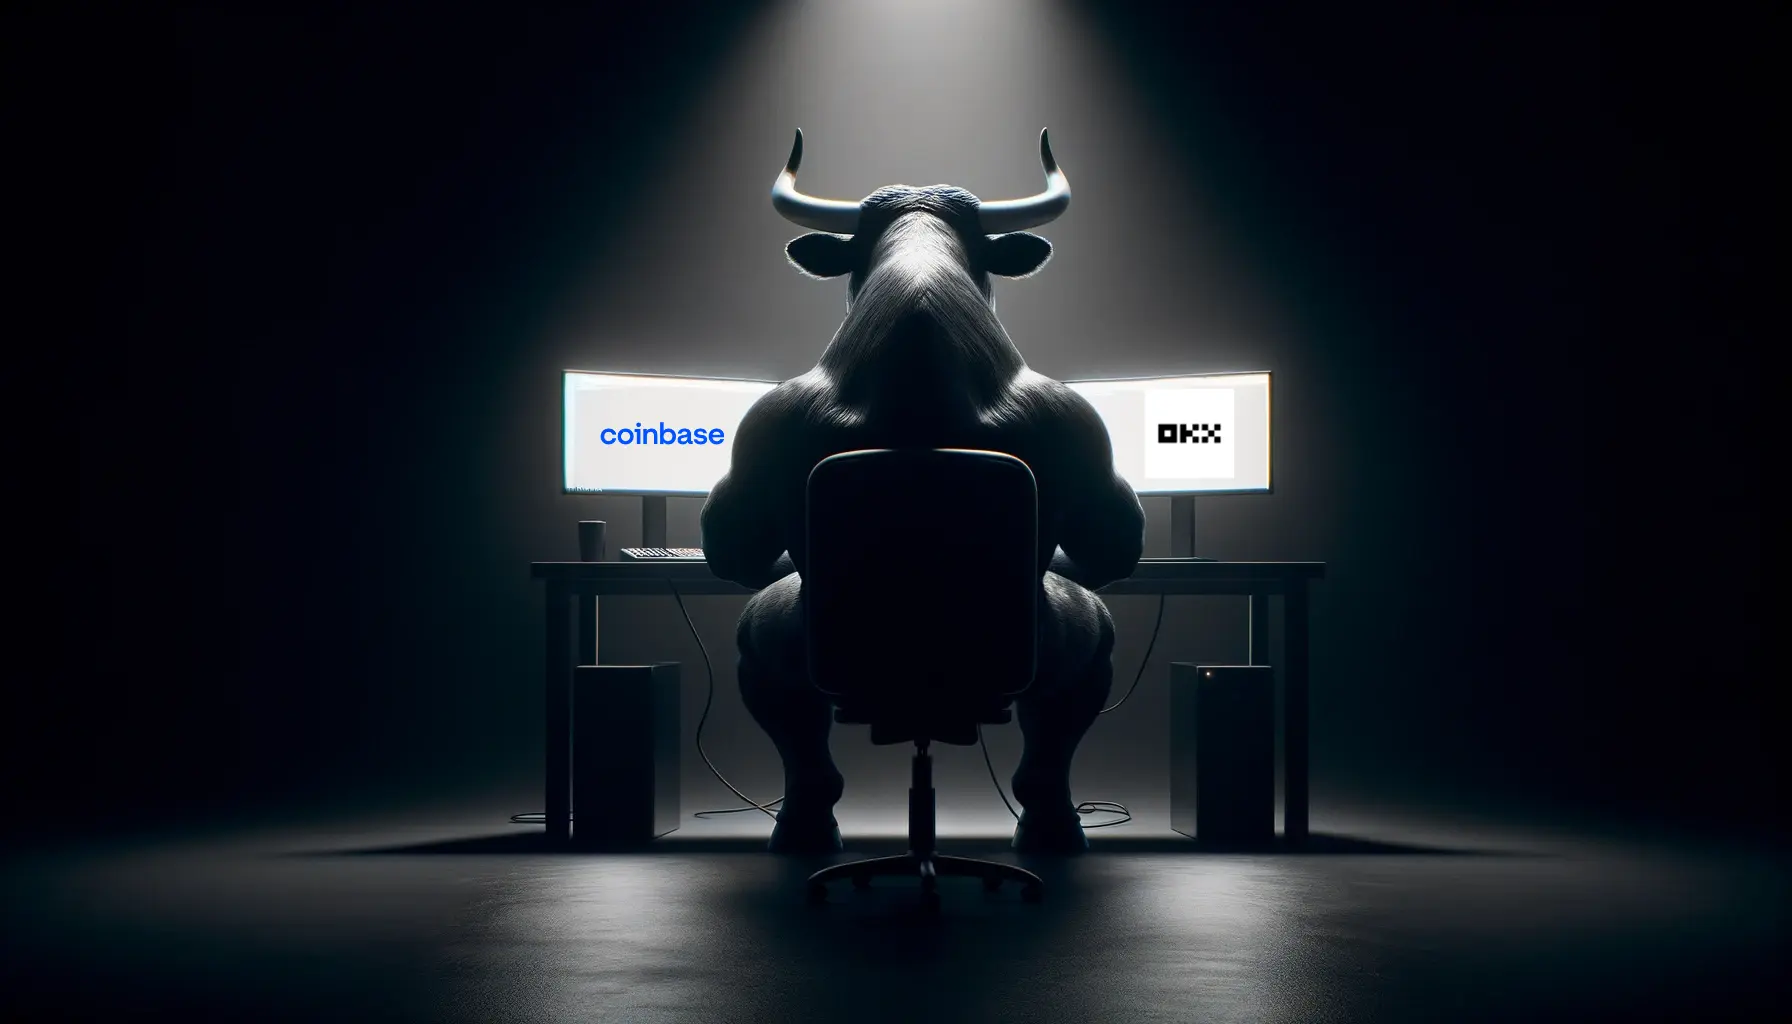 Silhouette of a bull sitting at a desk with monitors displaying crypto exchange logos, highlighting the OKX vs Coinbase comparison